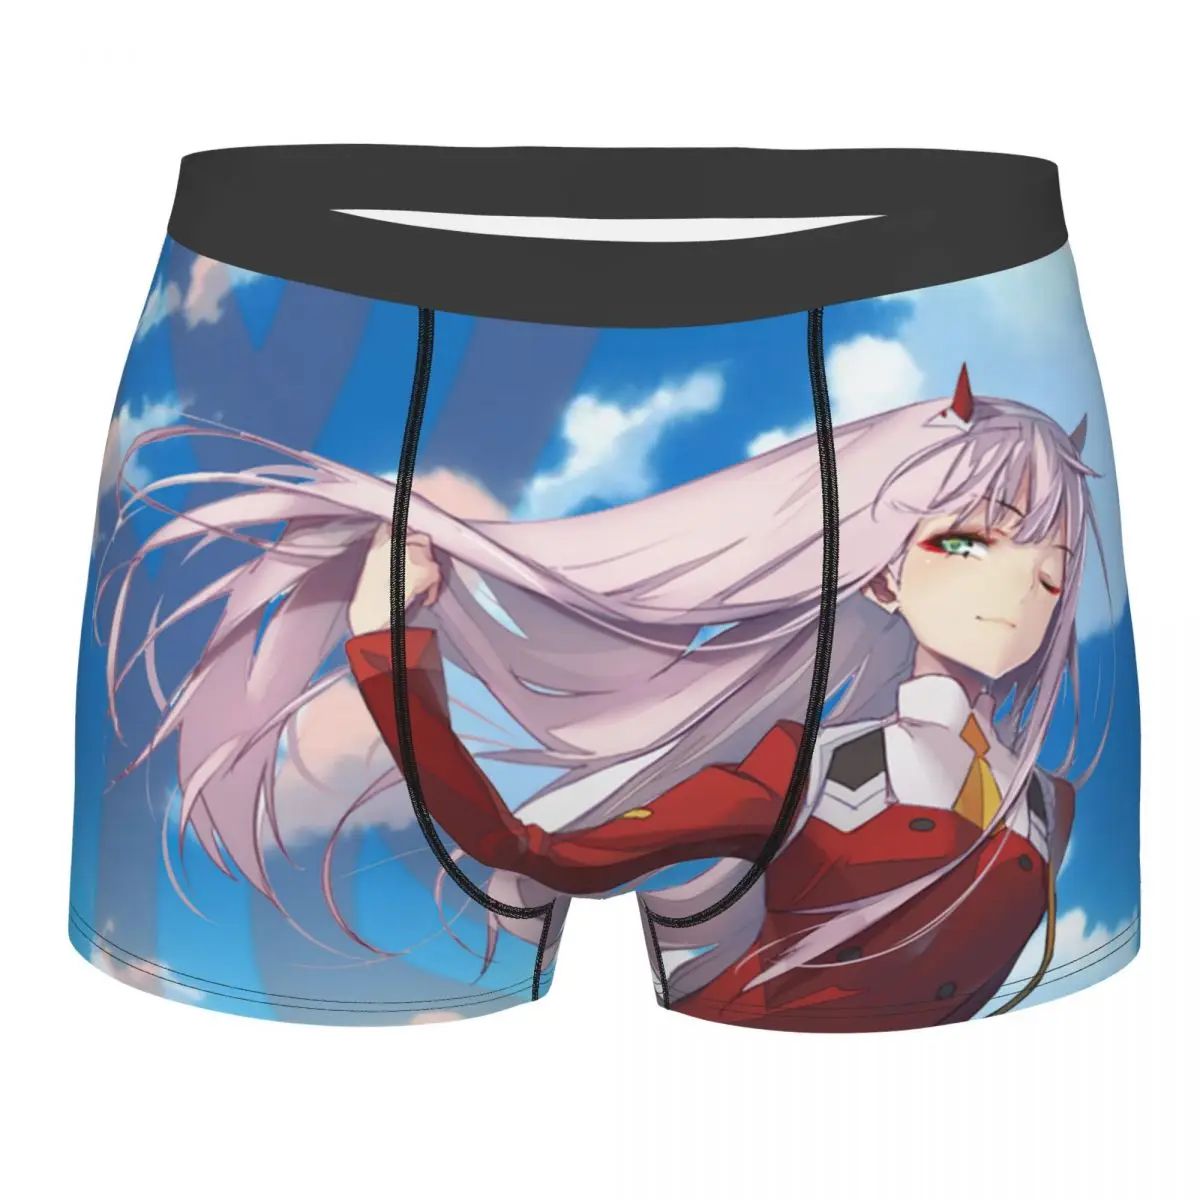 

Darling In The FranXX Zero Two Anime Girls Men Underwear Boxer Briefs Shorts Panties Printed Soft Underpants for Homme S-XXL